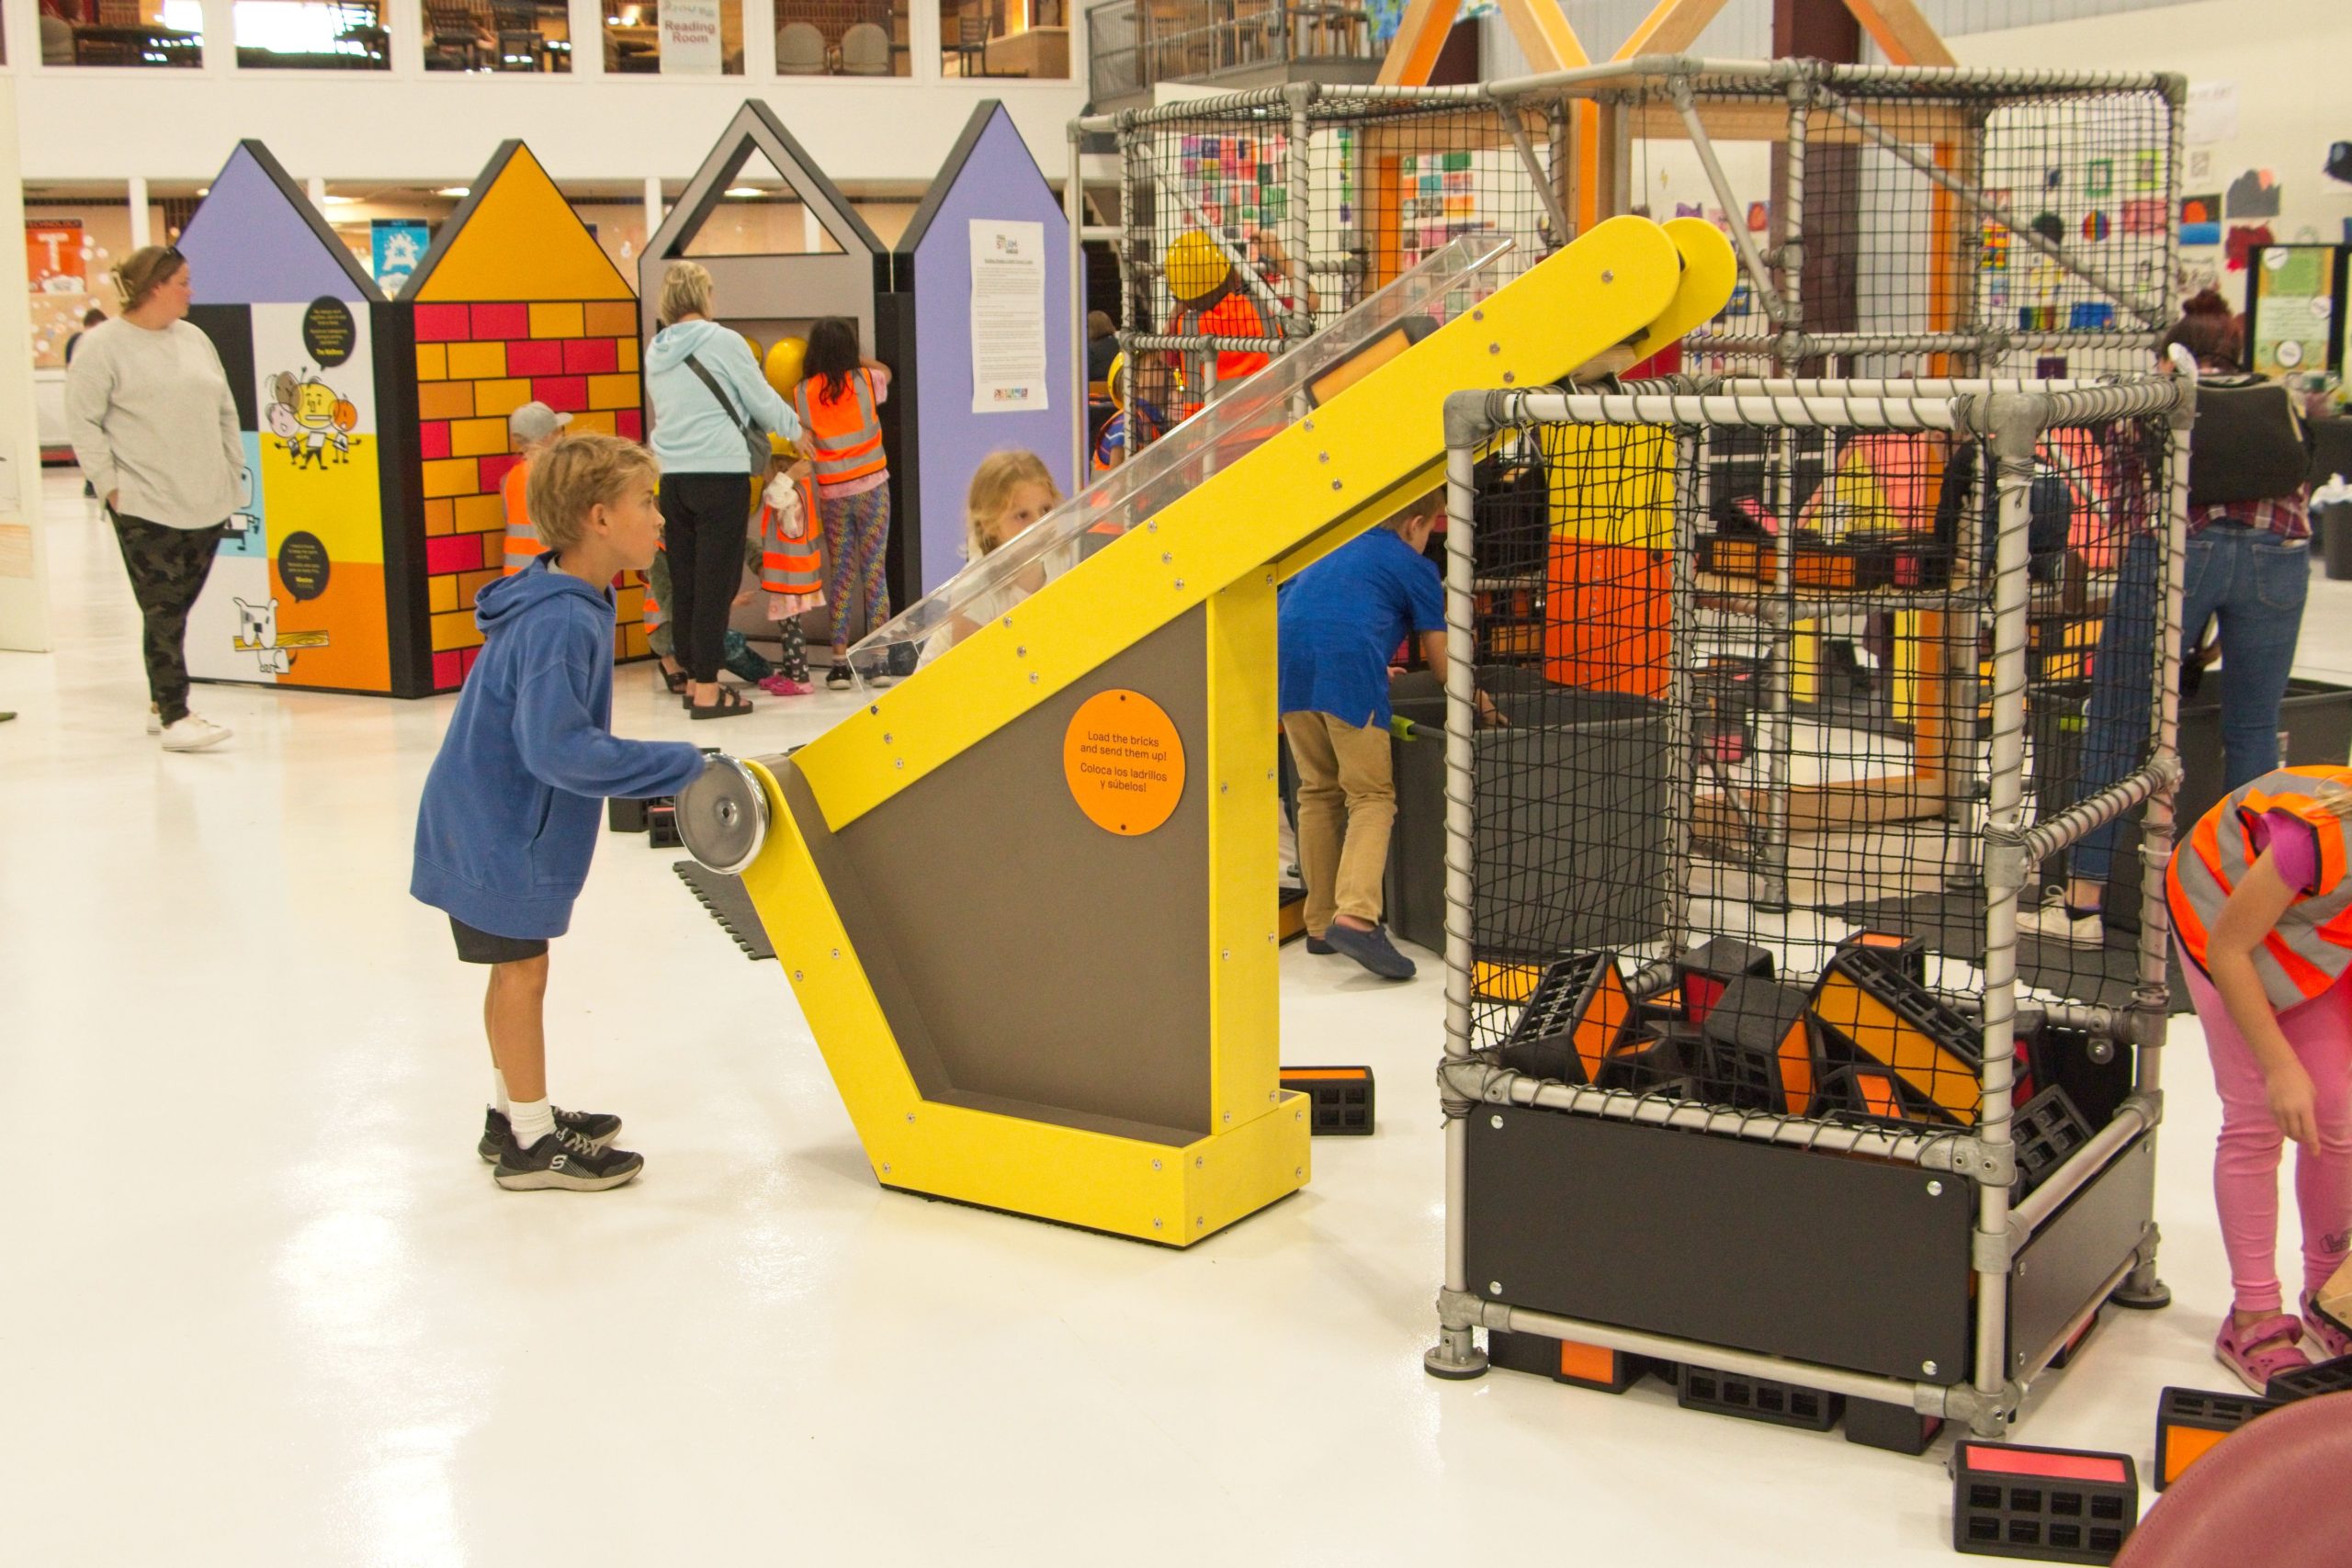 A boy in a blue sweatshirt turns the handle of a ramp moving a block upwards, leading to a big holder of building blocks